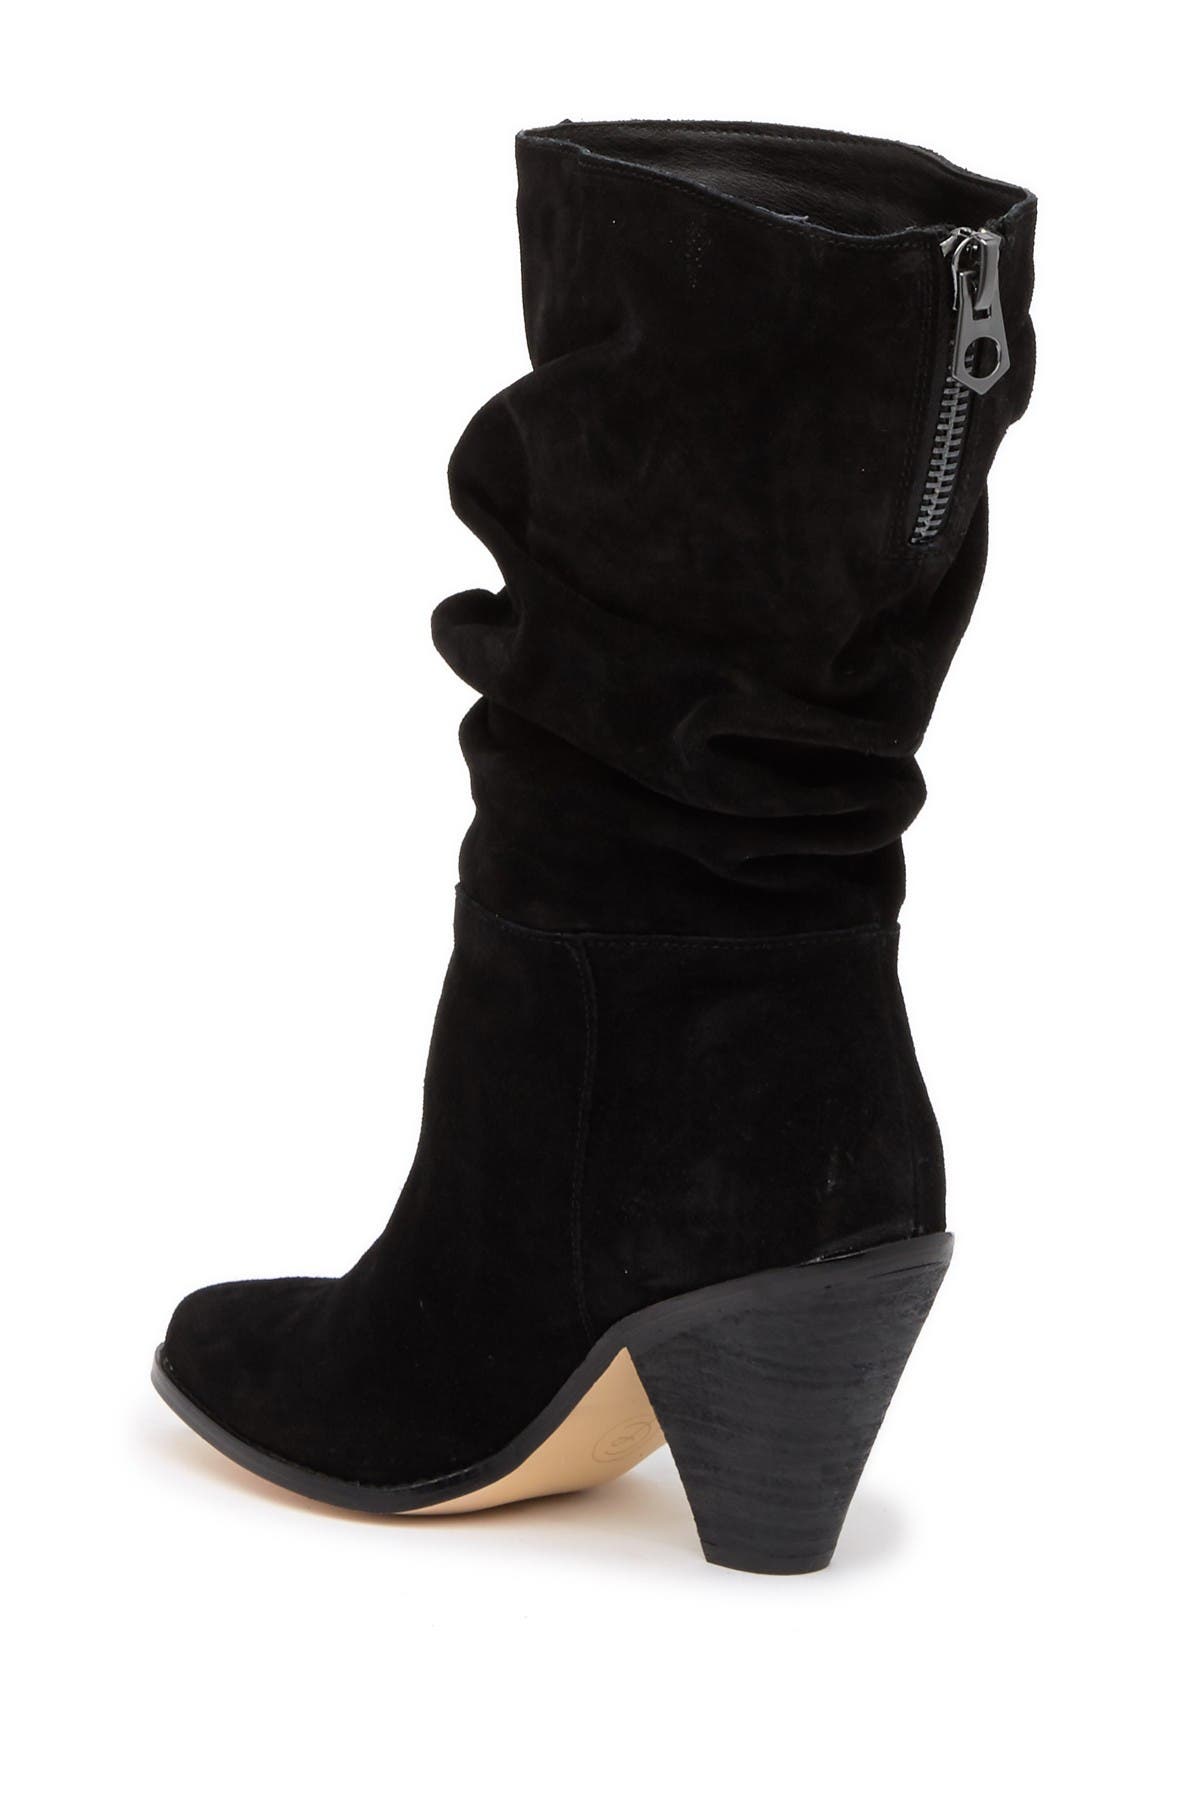 chinese laundry slouch stella boot